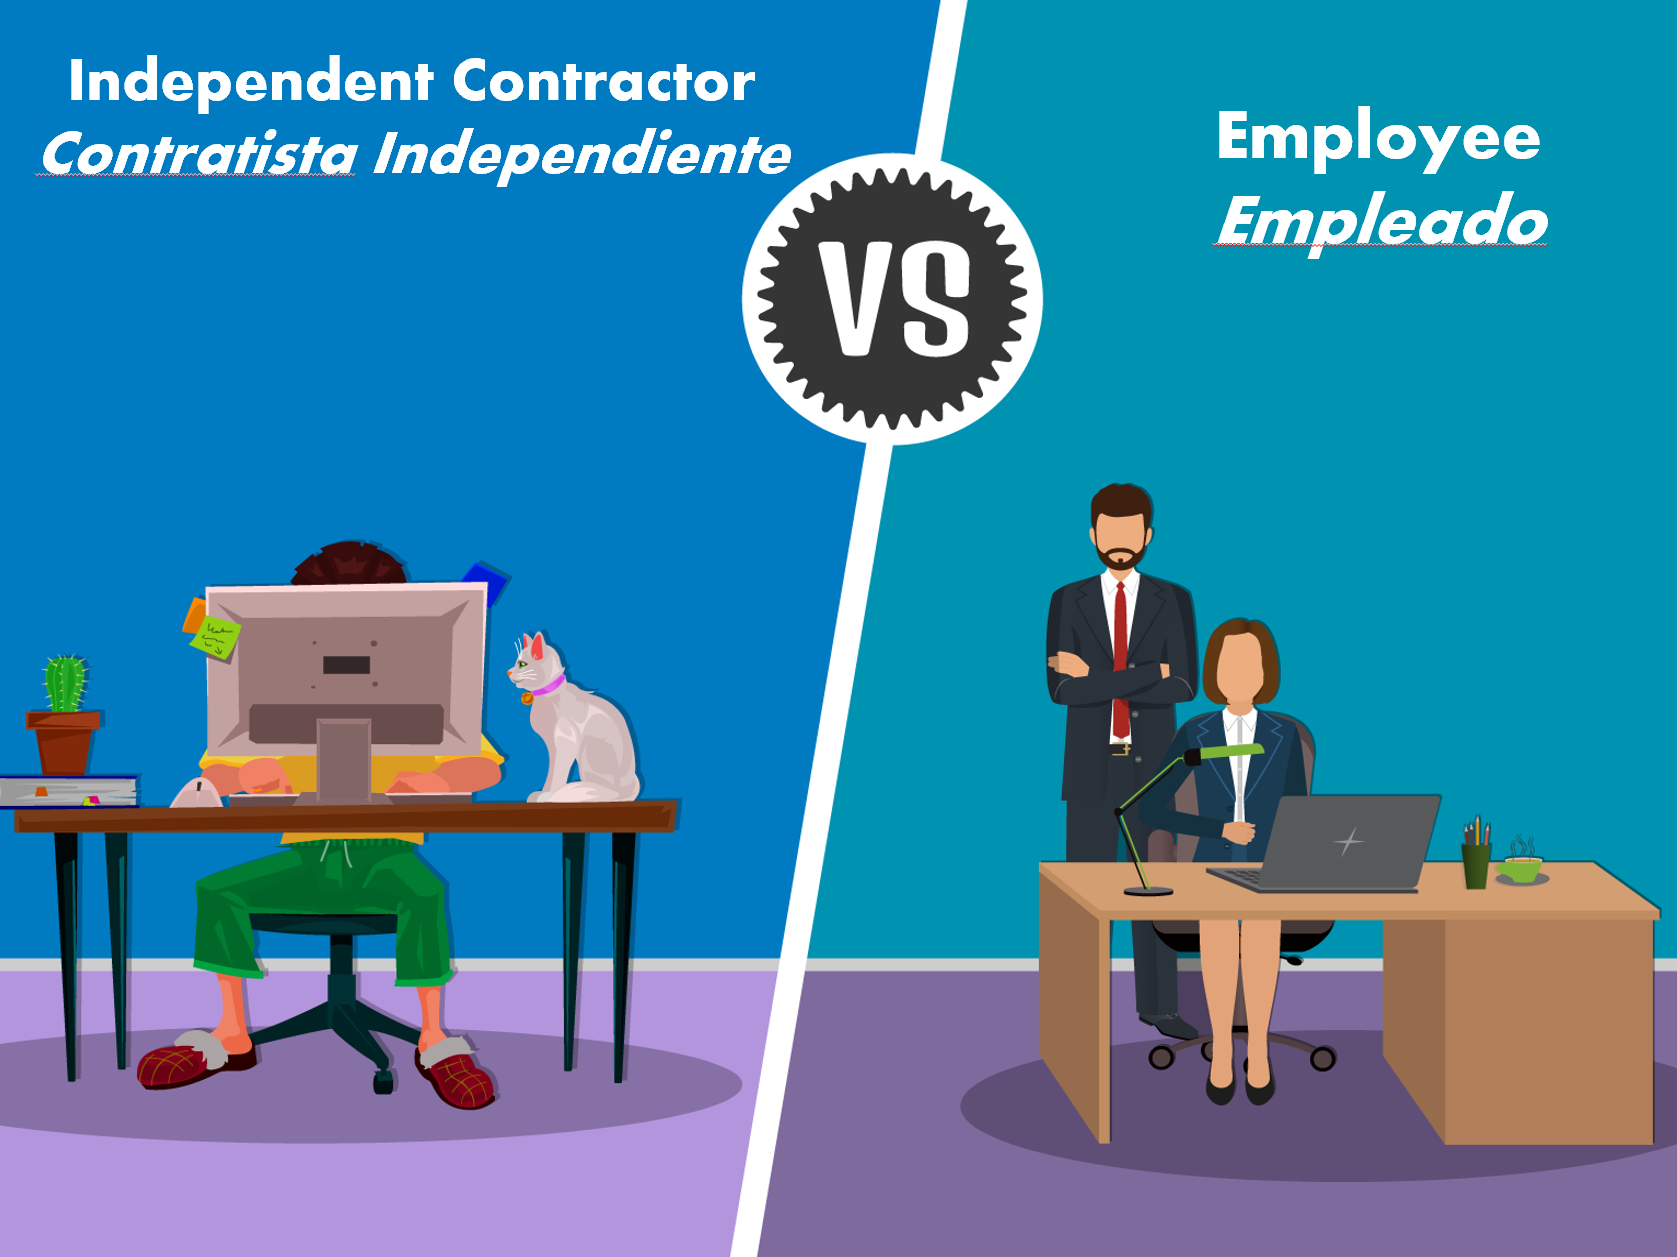 Independent Contractor v. Employee